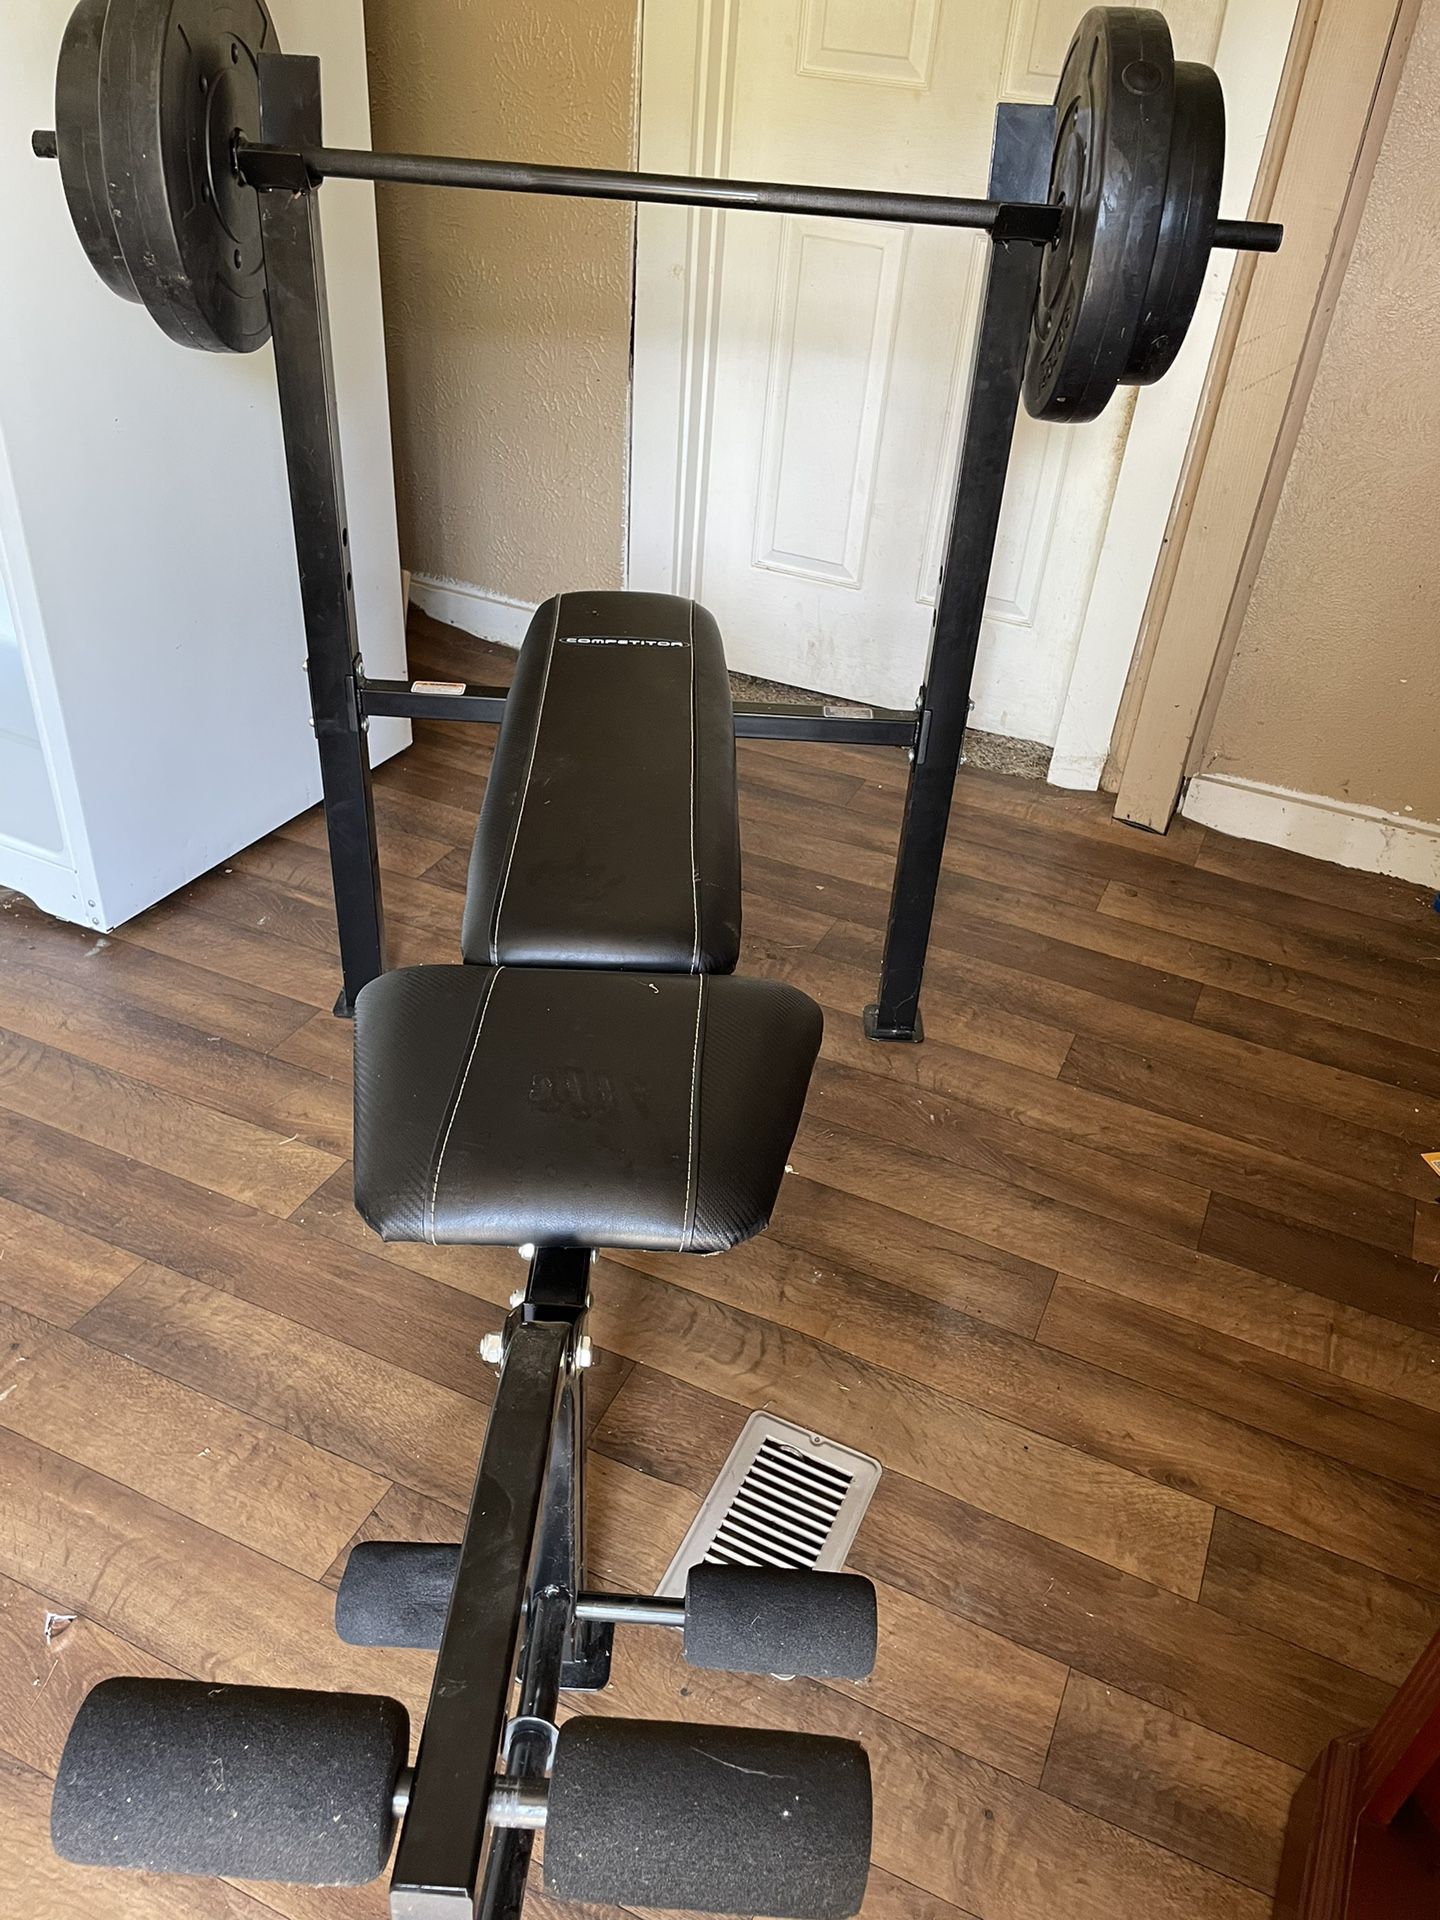 Weight Bench $100 OBO